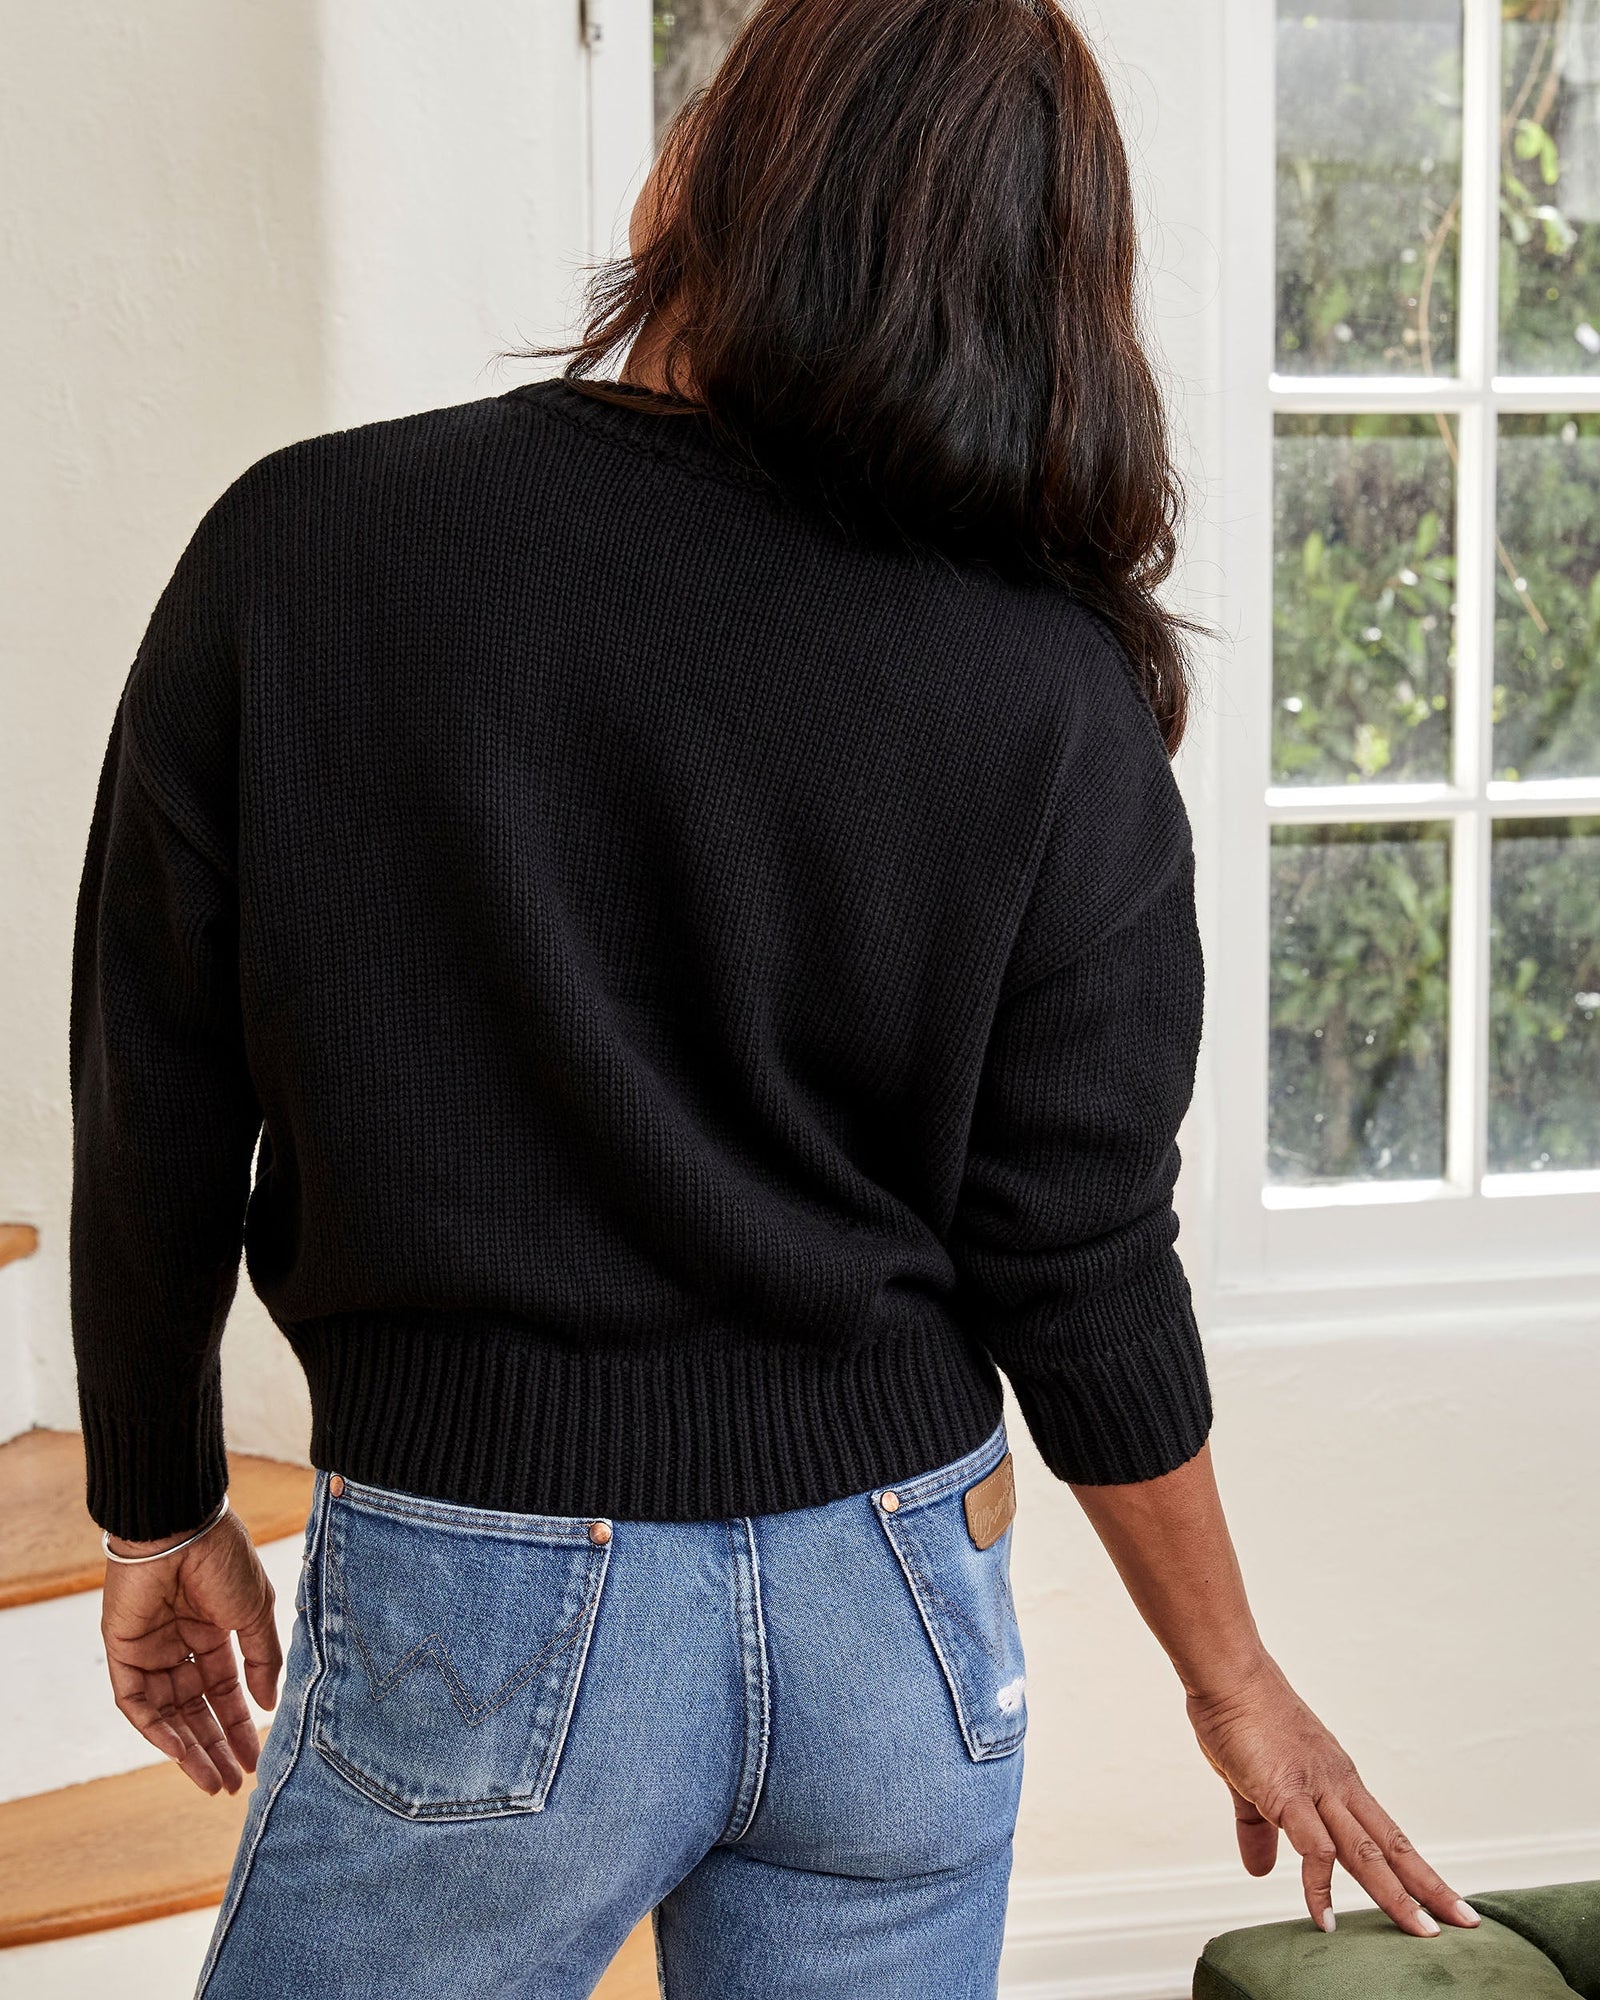 Back View of Joanna Wearing the Black w/ Cream Ciao Cotton-Cashmere Drop Shoulder Sweater 